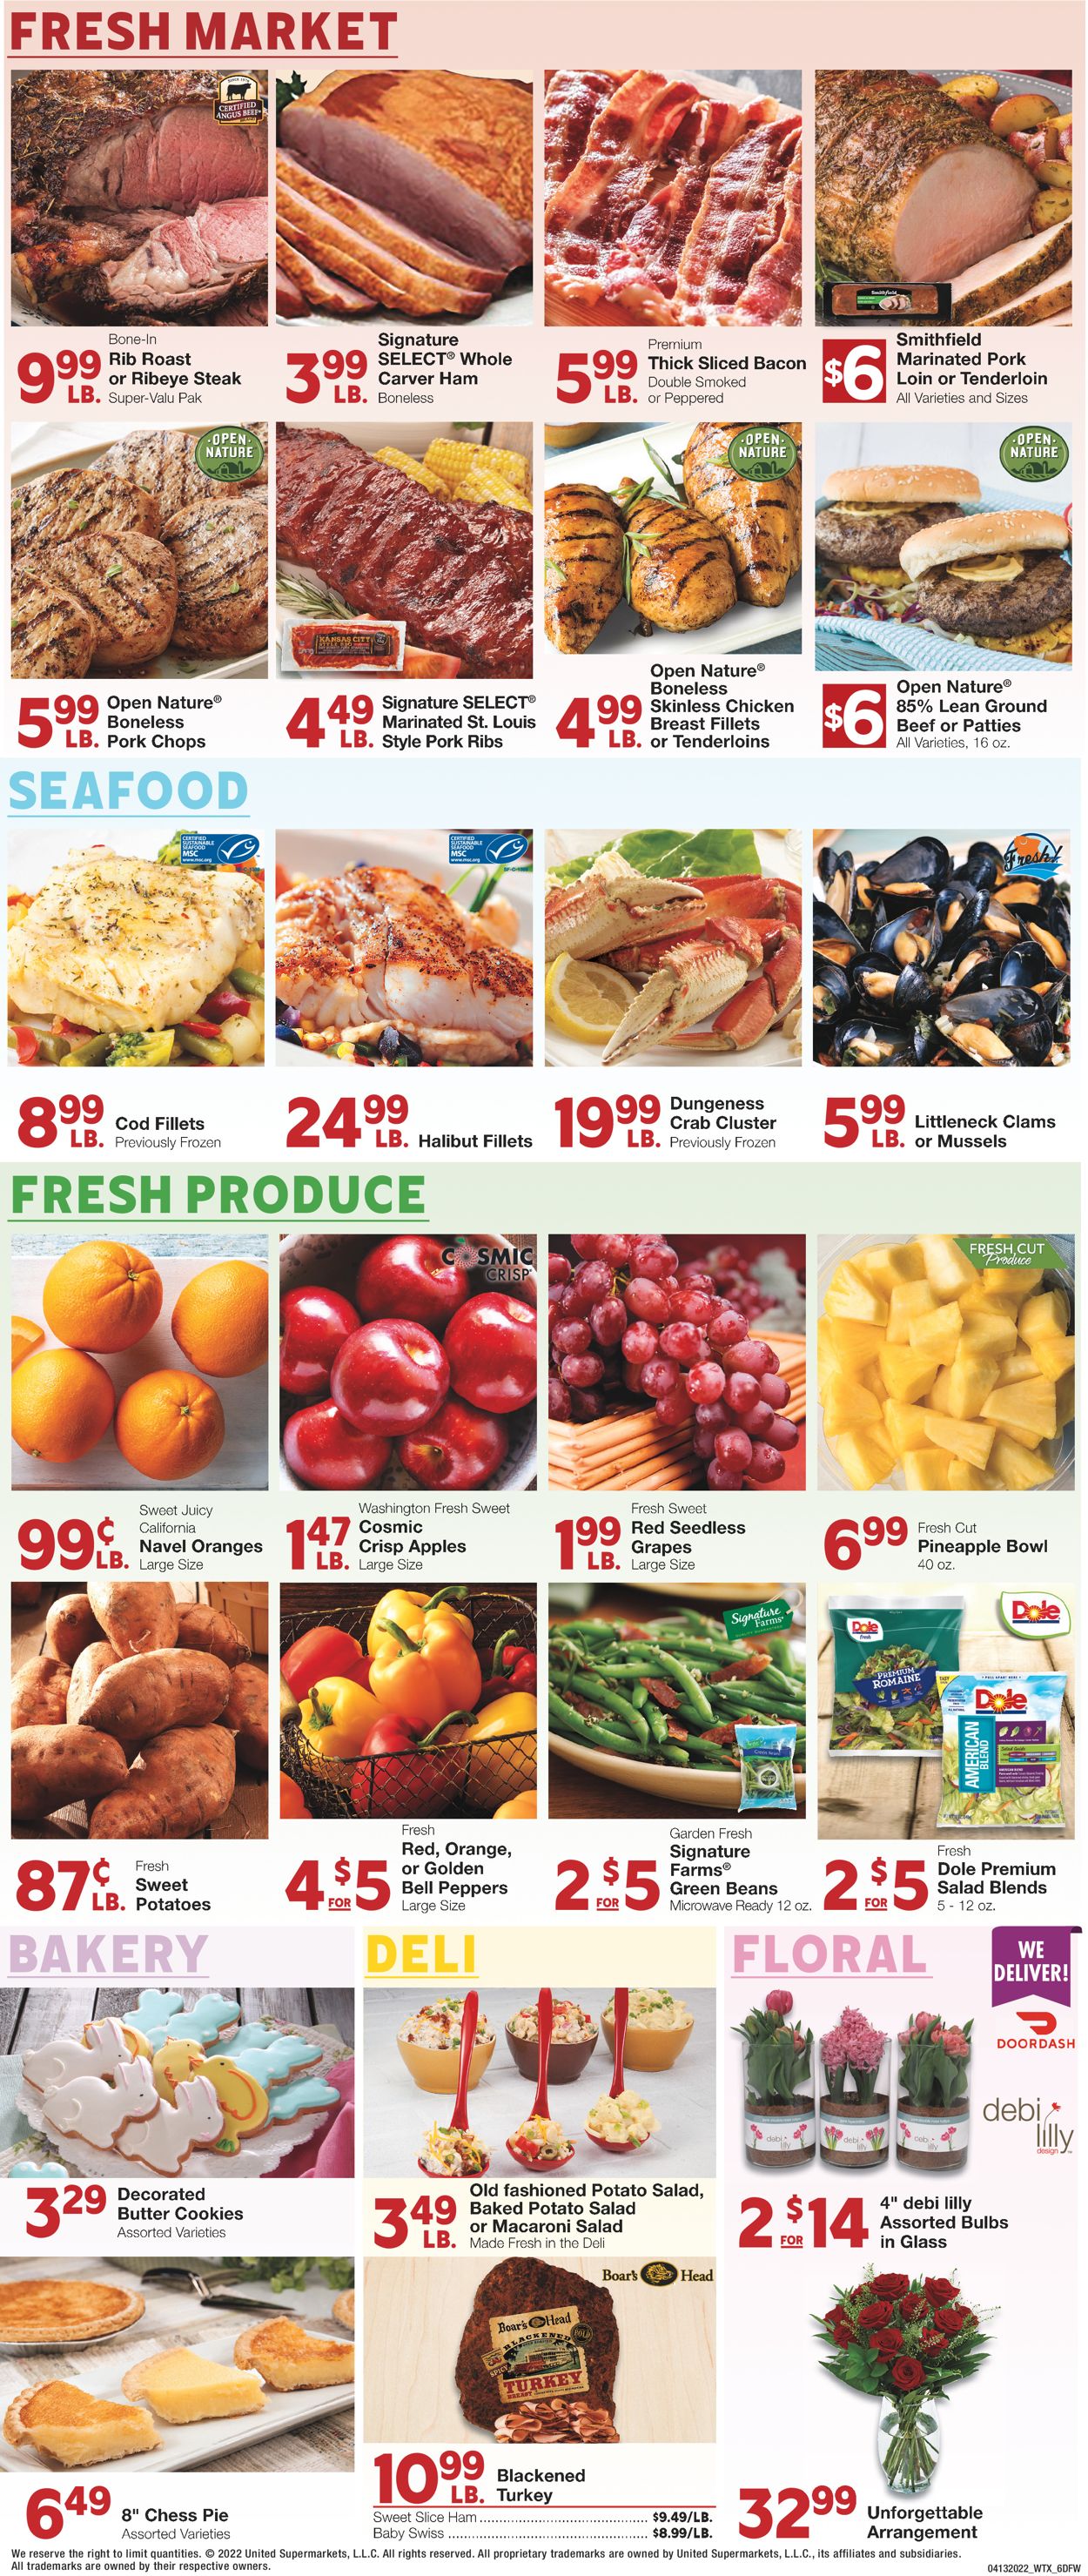 United Supermarkets EASTER AD 2022 Weekly Ad Circular - valid 04/13-04/19/2022 (Page 6)